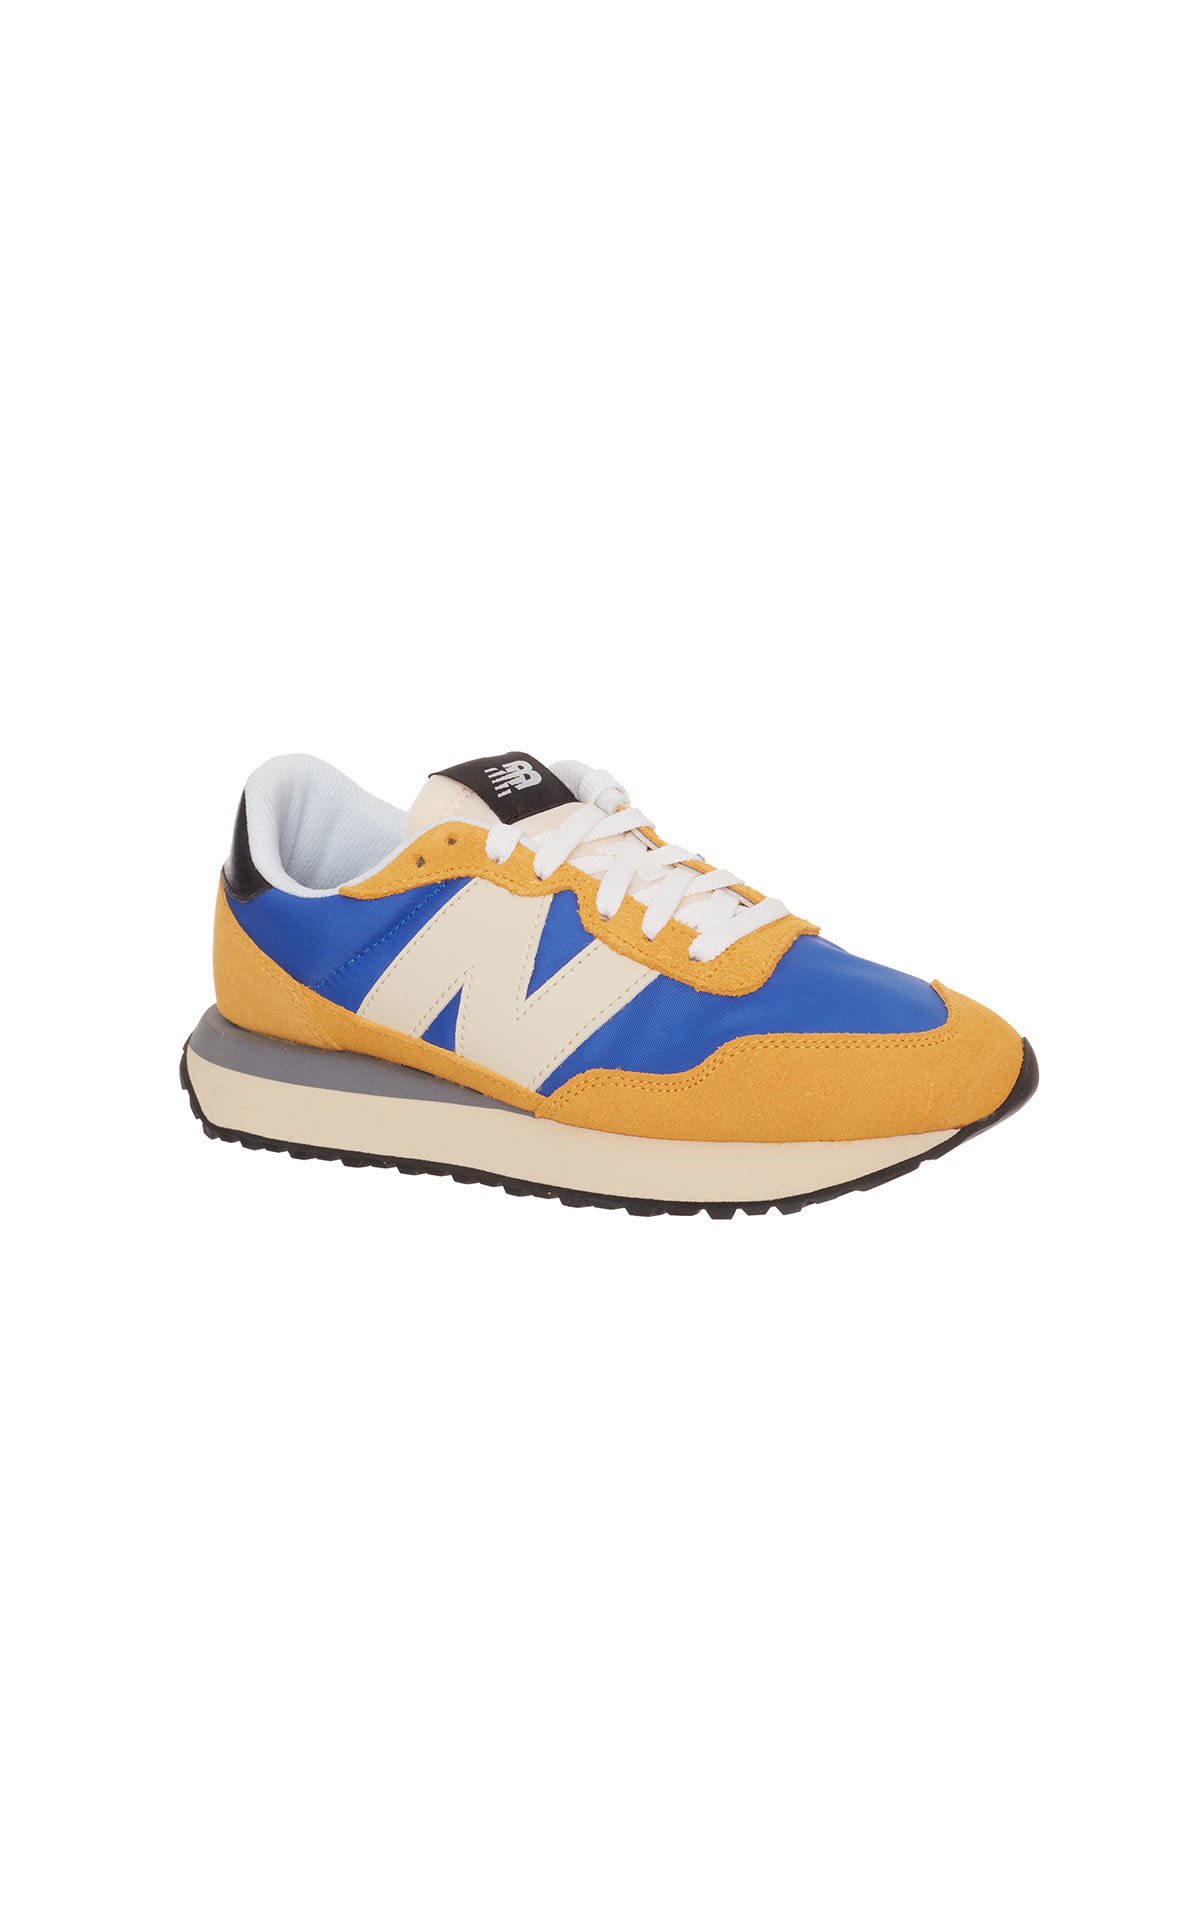 New Balance MS 237 Sneaker from Bicester Village